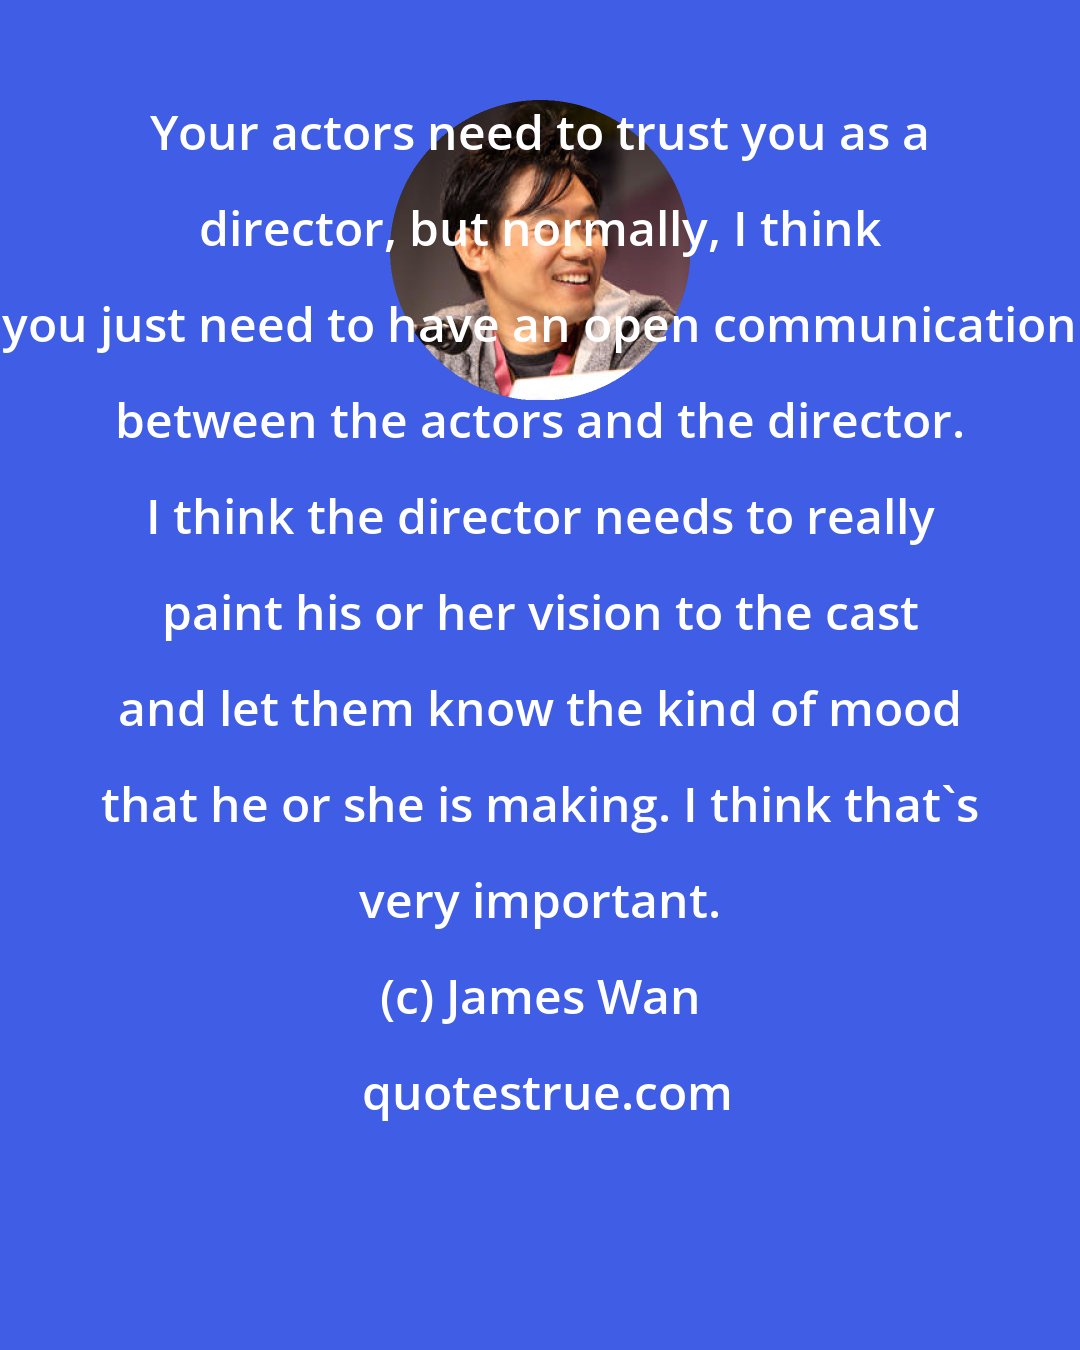 James Wan: Your actors need to trust you as a director, but normally, I think you just need to have an open communication between the actors and the director. I think the director needs to really paint his or her vision to the cast and let them know the kind of mood that he or she is making. I think that's very important.